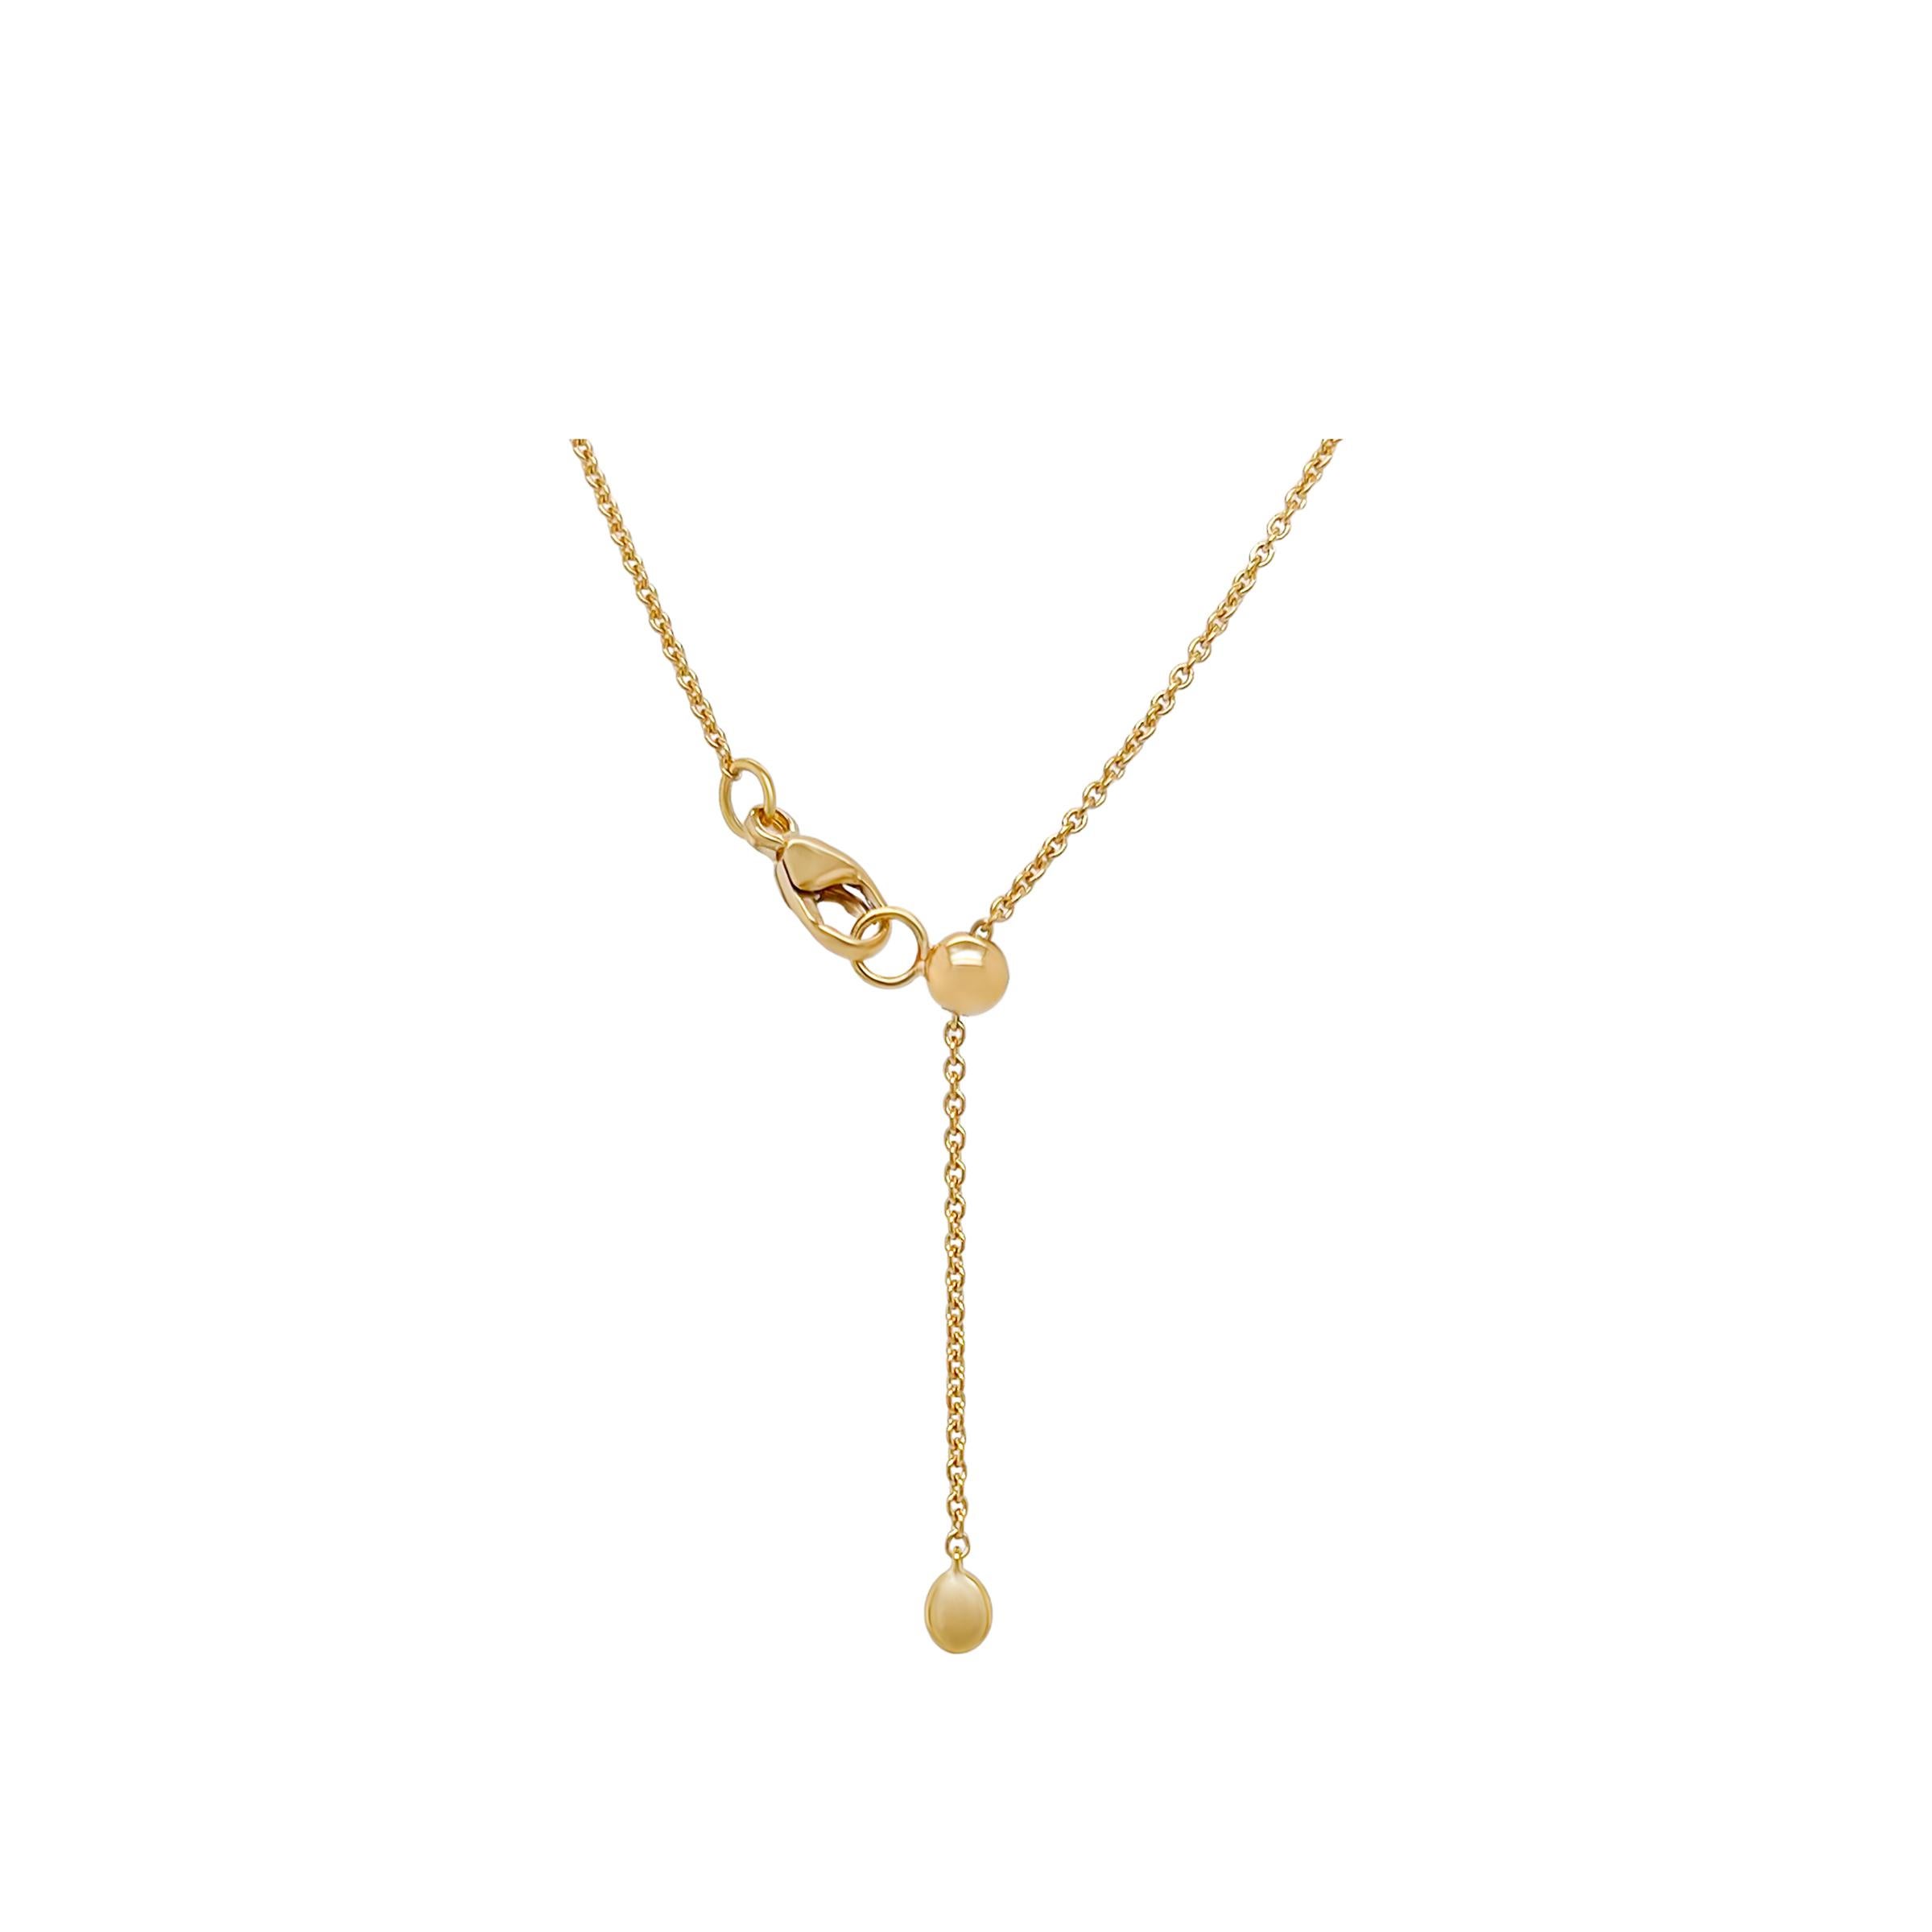 Our Flower of Life Pendant is expertly crafted from shimmering 18k yellow gold and high quality diamonds. This intricate design captures the essence of interconnectedness and is a symbol of harmony for all living things. Crafted from the finest